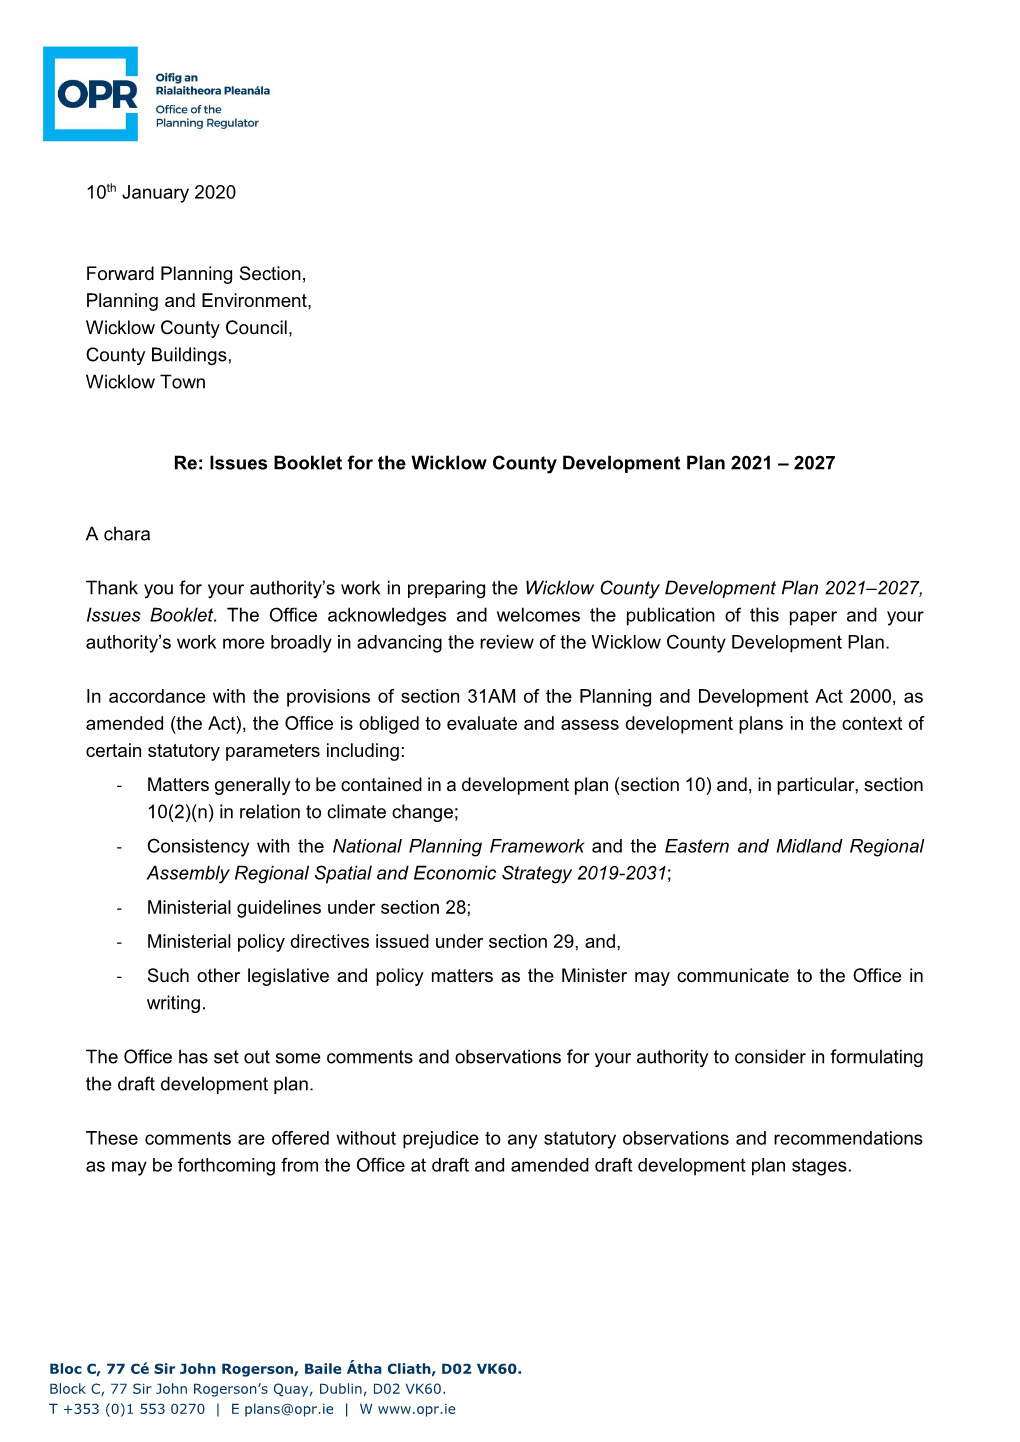 10Th January 2020 Forward Planning Section, Planning and Environment, Wicklow County Council, County Buildings, Wicklow Town